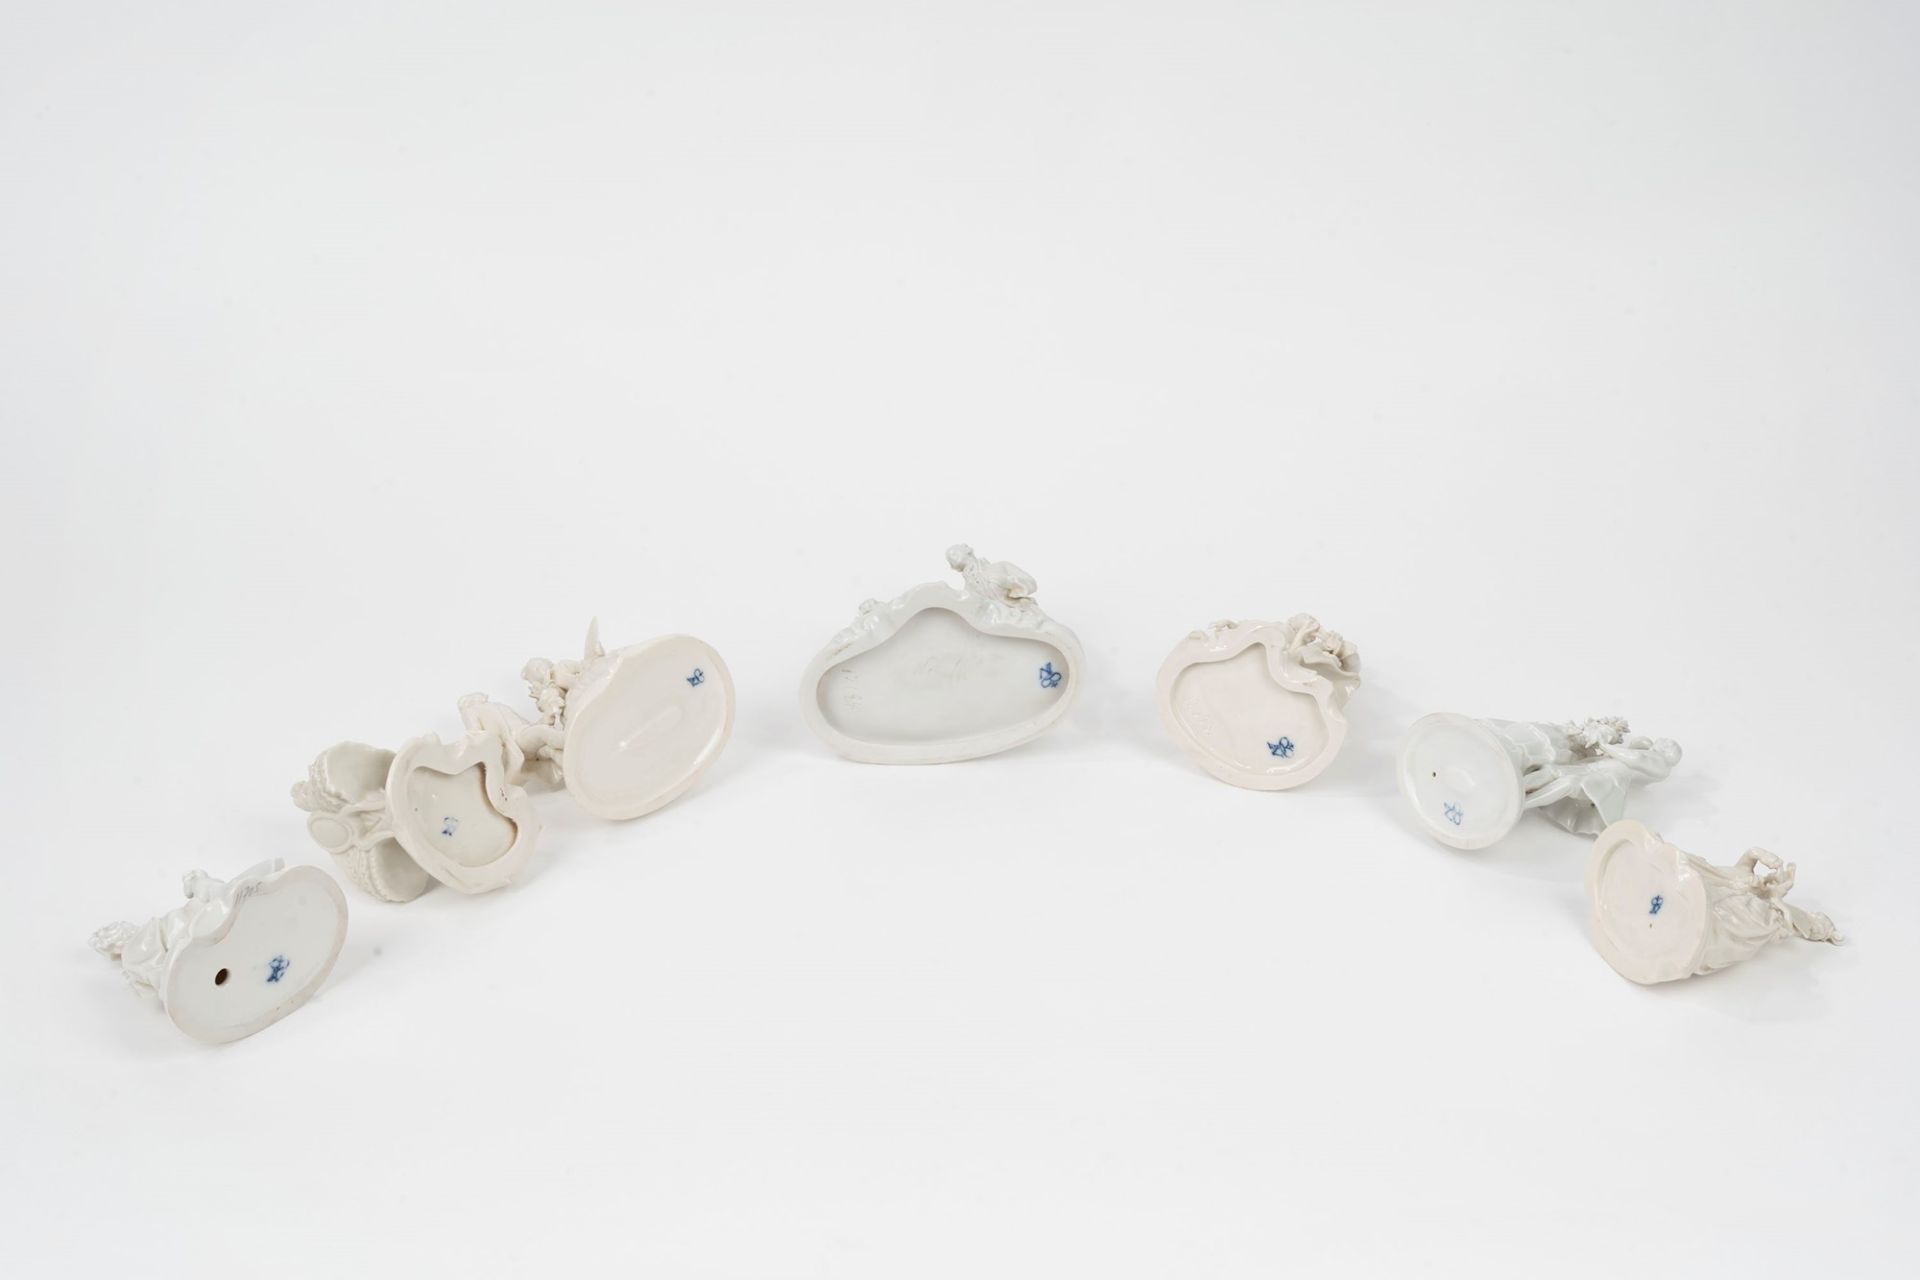 Lot consisting of seven white porcelain sculptures, 20th century - Image 10 of 10